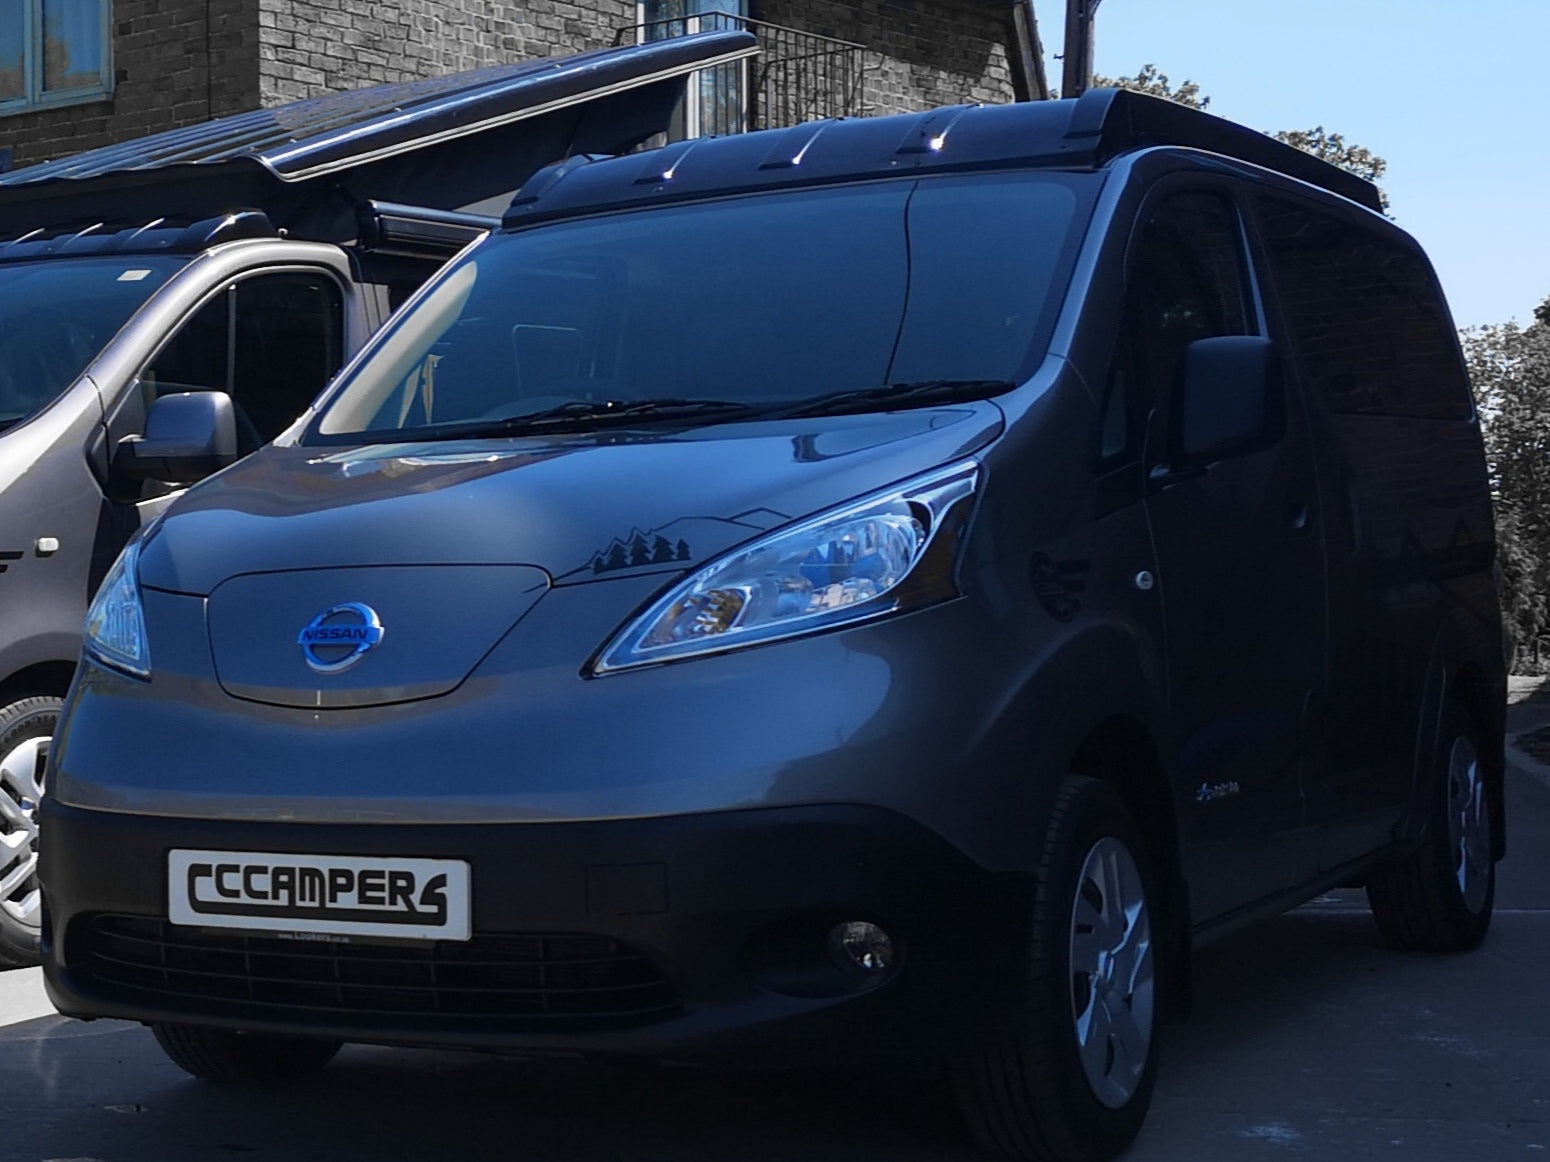 Nissan eNV200 Clee Camper Car by CCCampers Ready for the UK's Electric Generation - CCCAMPERS 